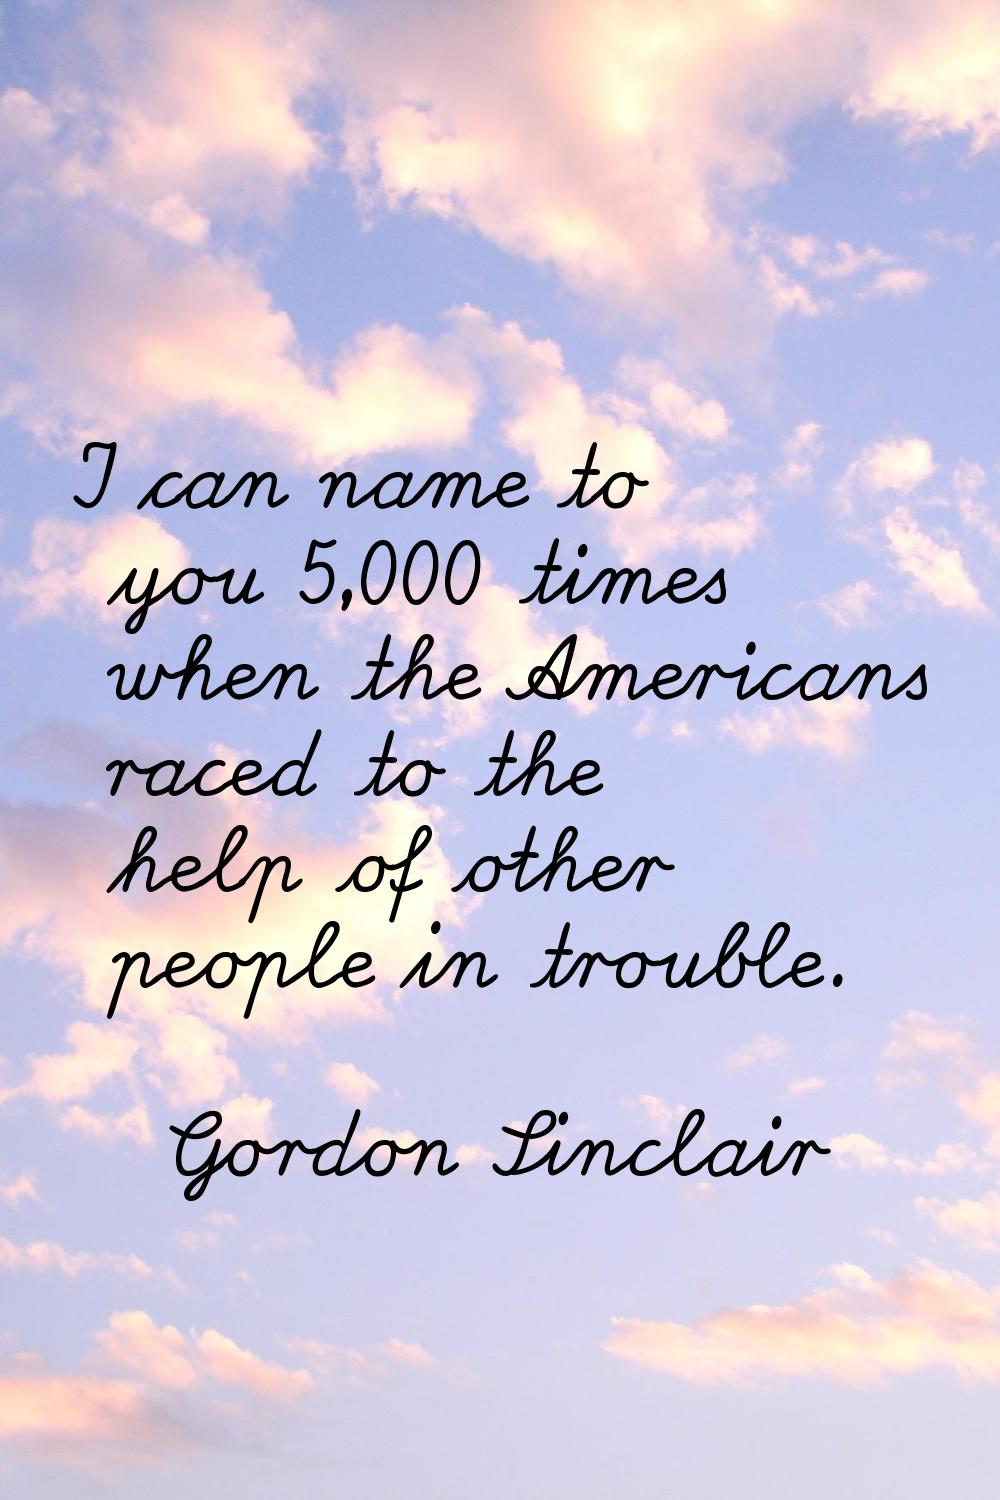 I can name to you 5,000 times when the Americans raced to the help of other people in trouble.